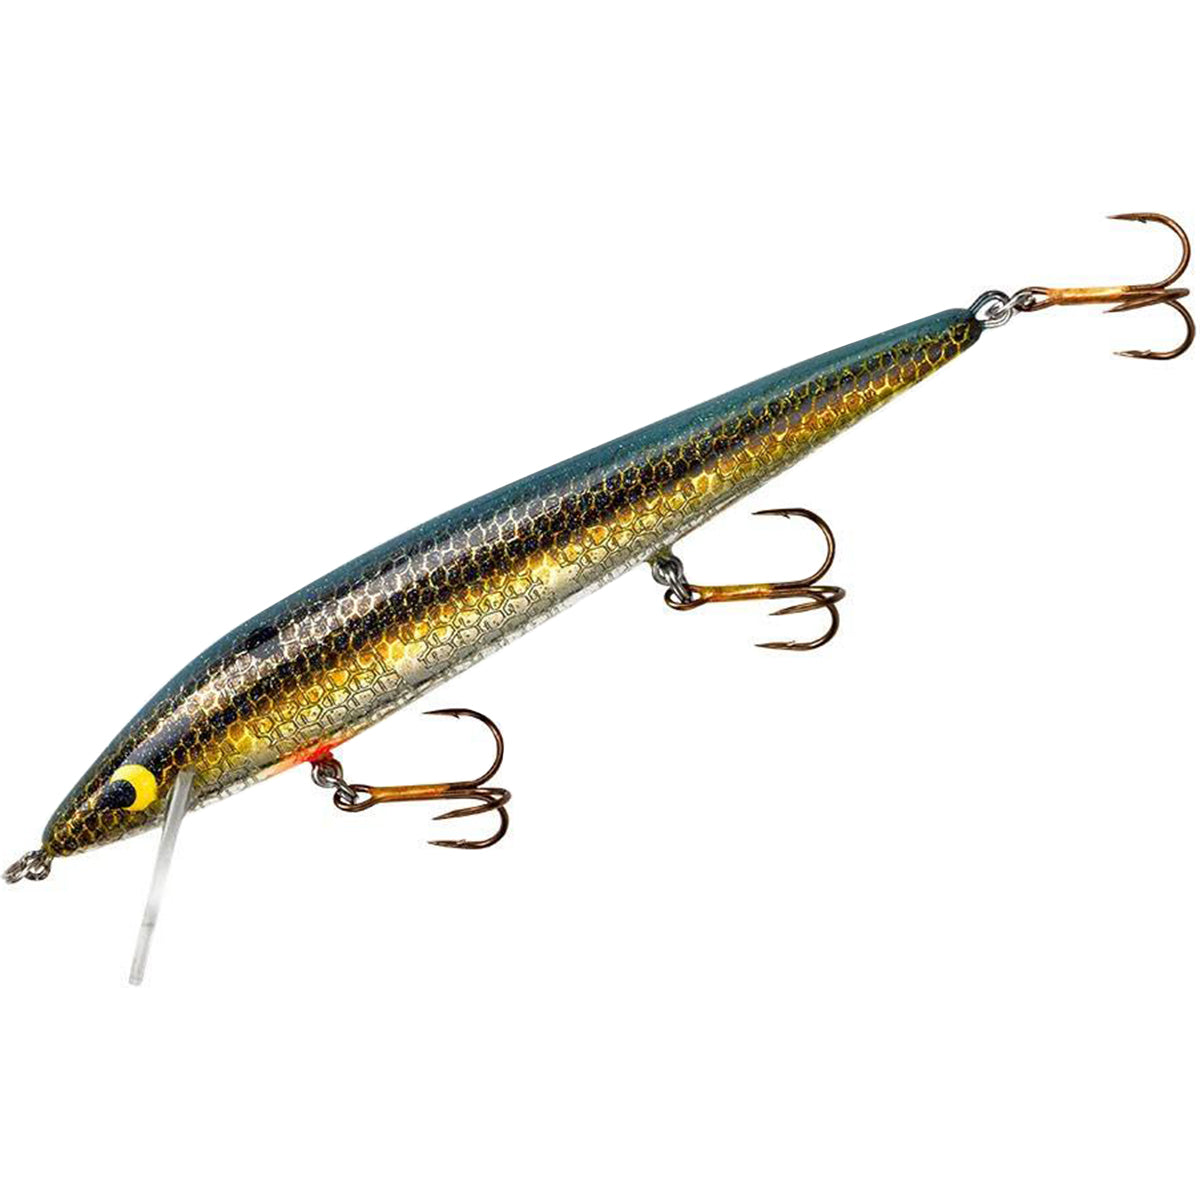 Storm WildEye Live Perch 3-inch Fishing Lures (3-Pack)